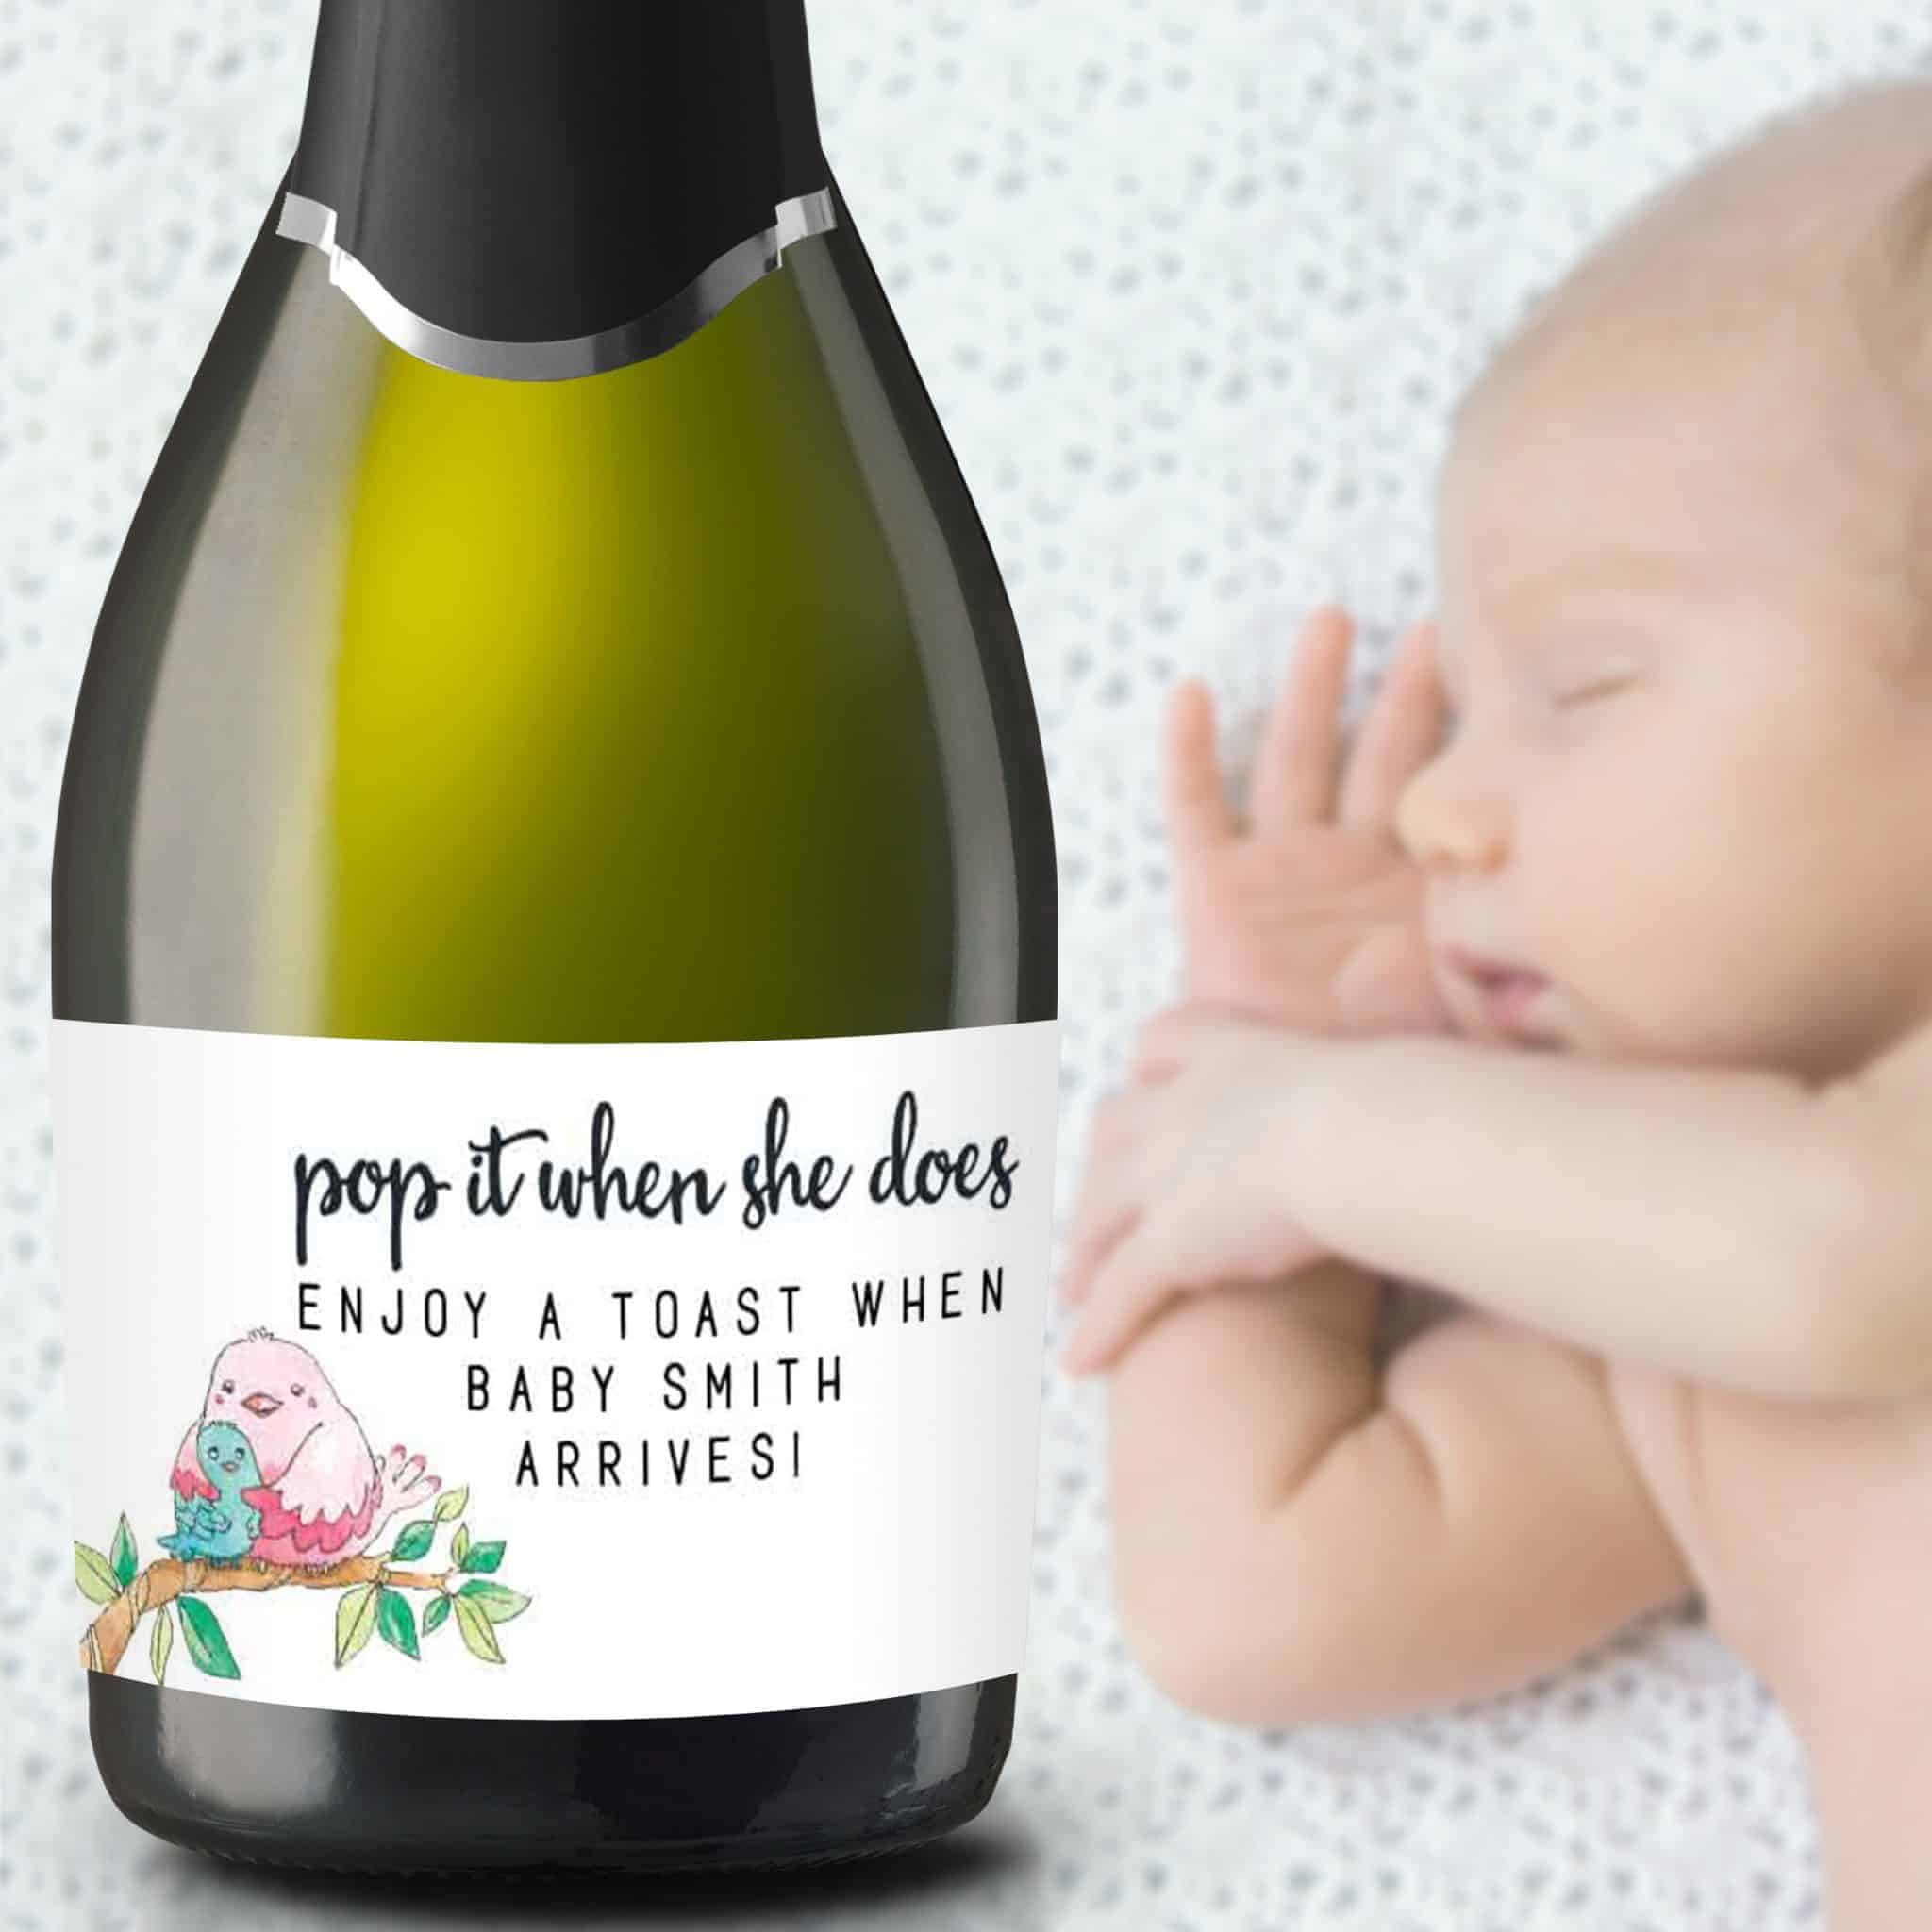 Mini-Champagne Bottle Labels for Baby Shower Baby Shower Custom Mini-Champagne Bottle Label Stickers Sold in Set of 8